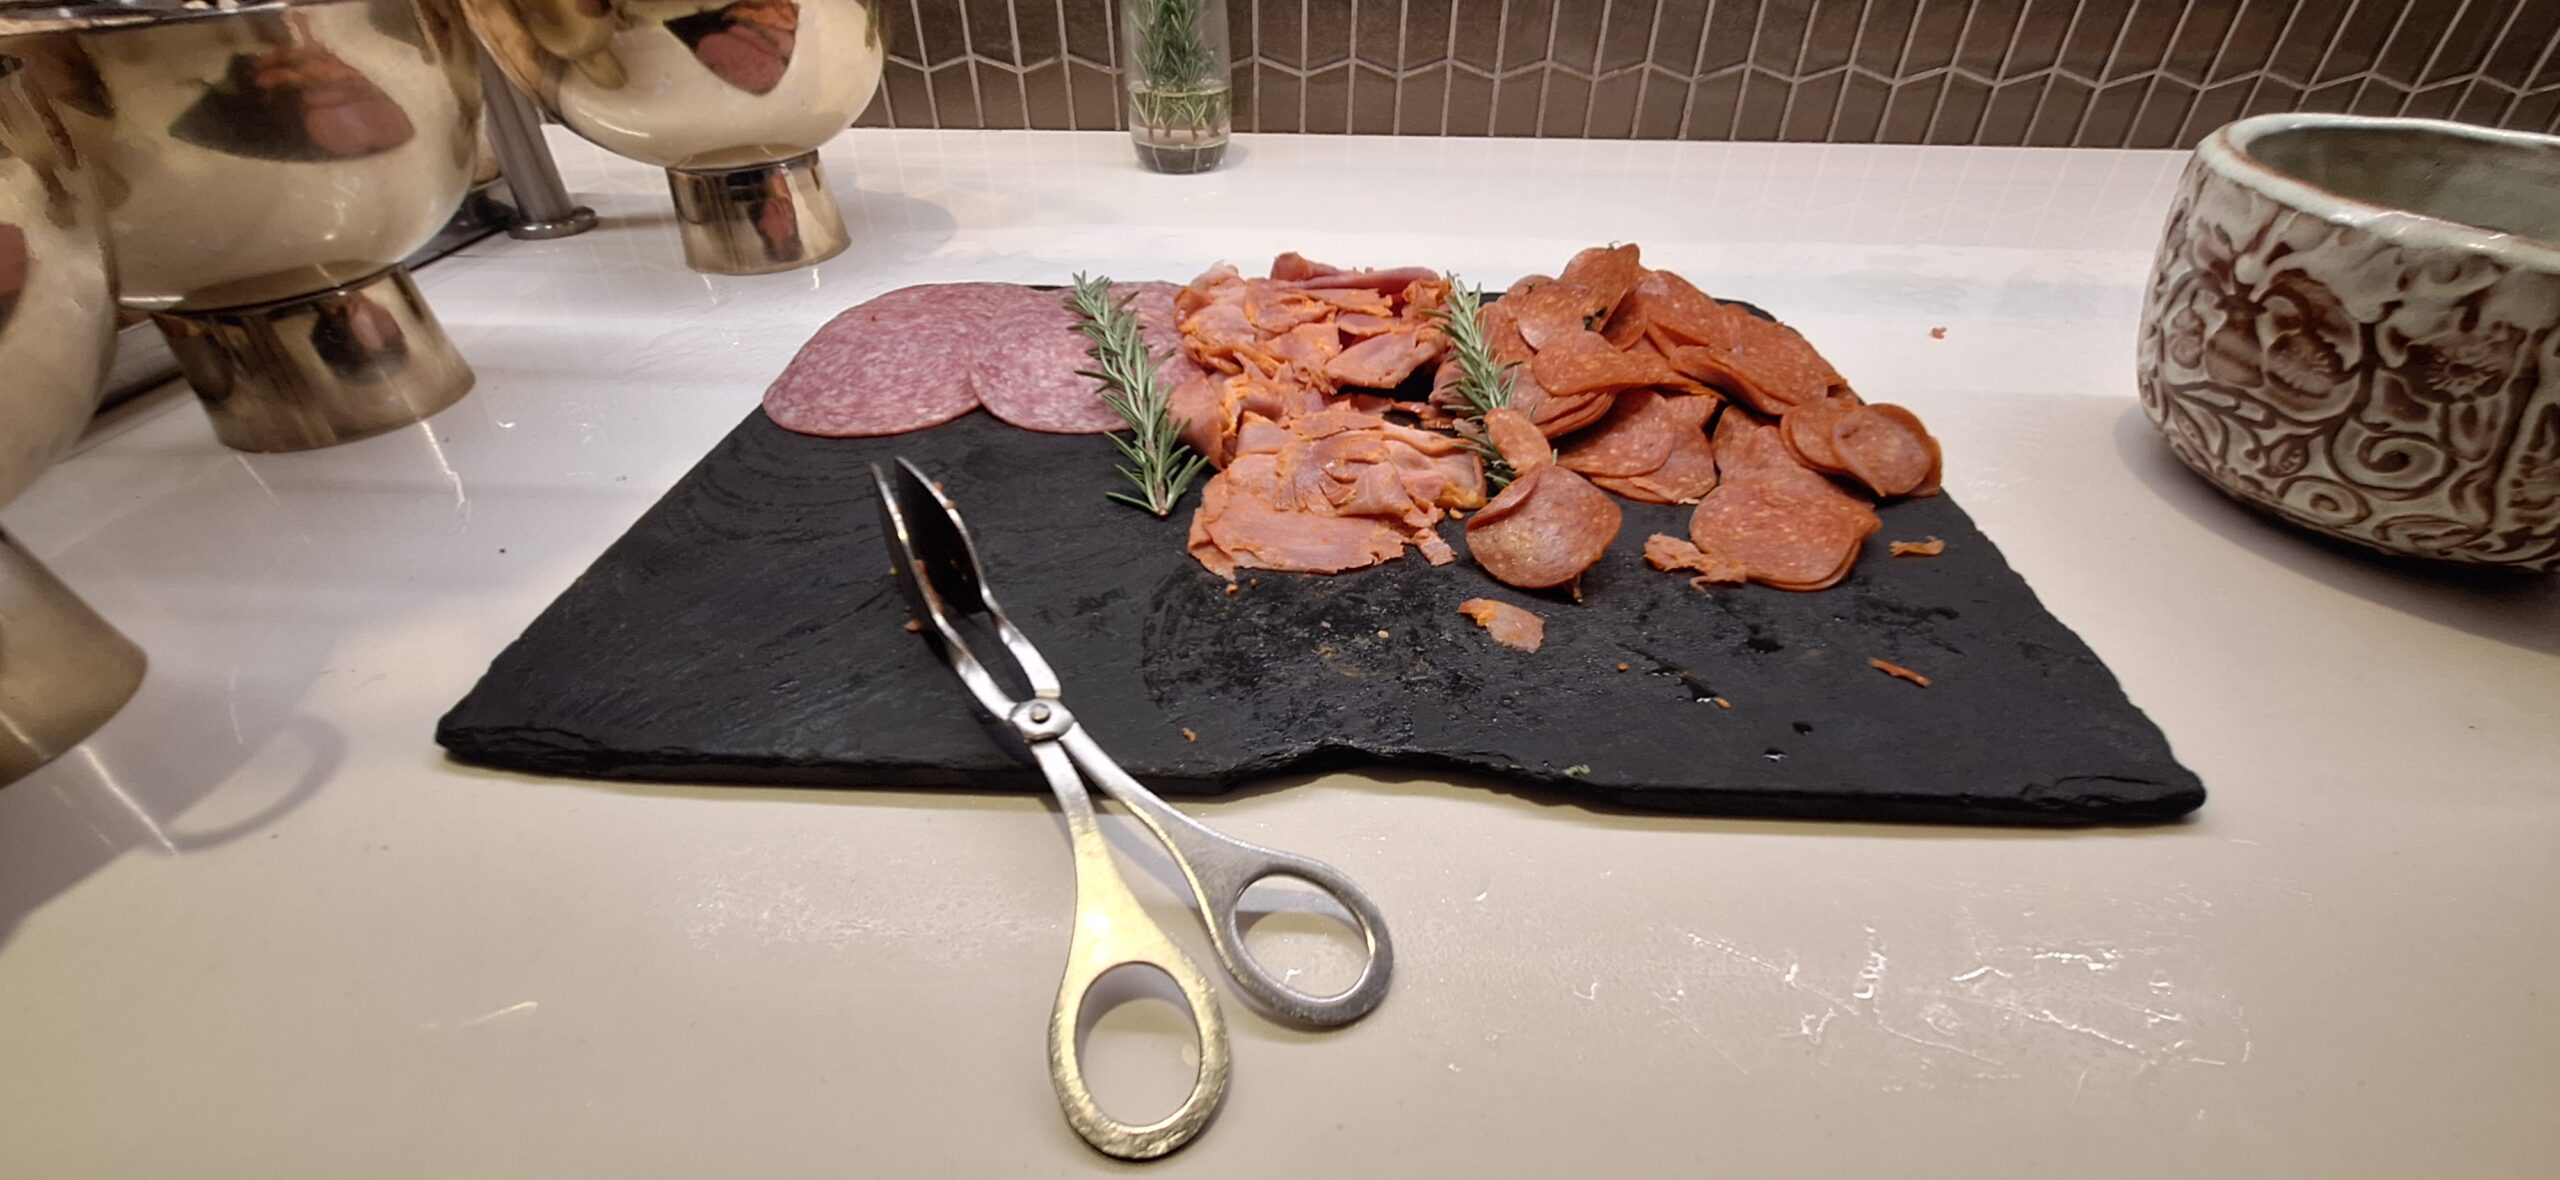 a cutting board with meat and scissors